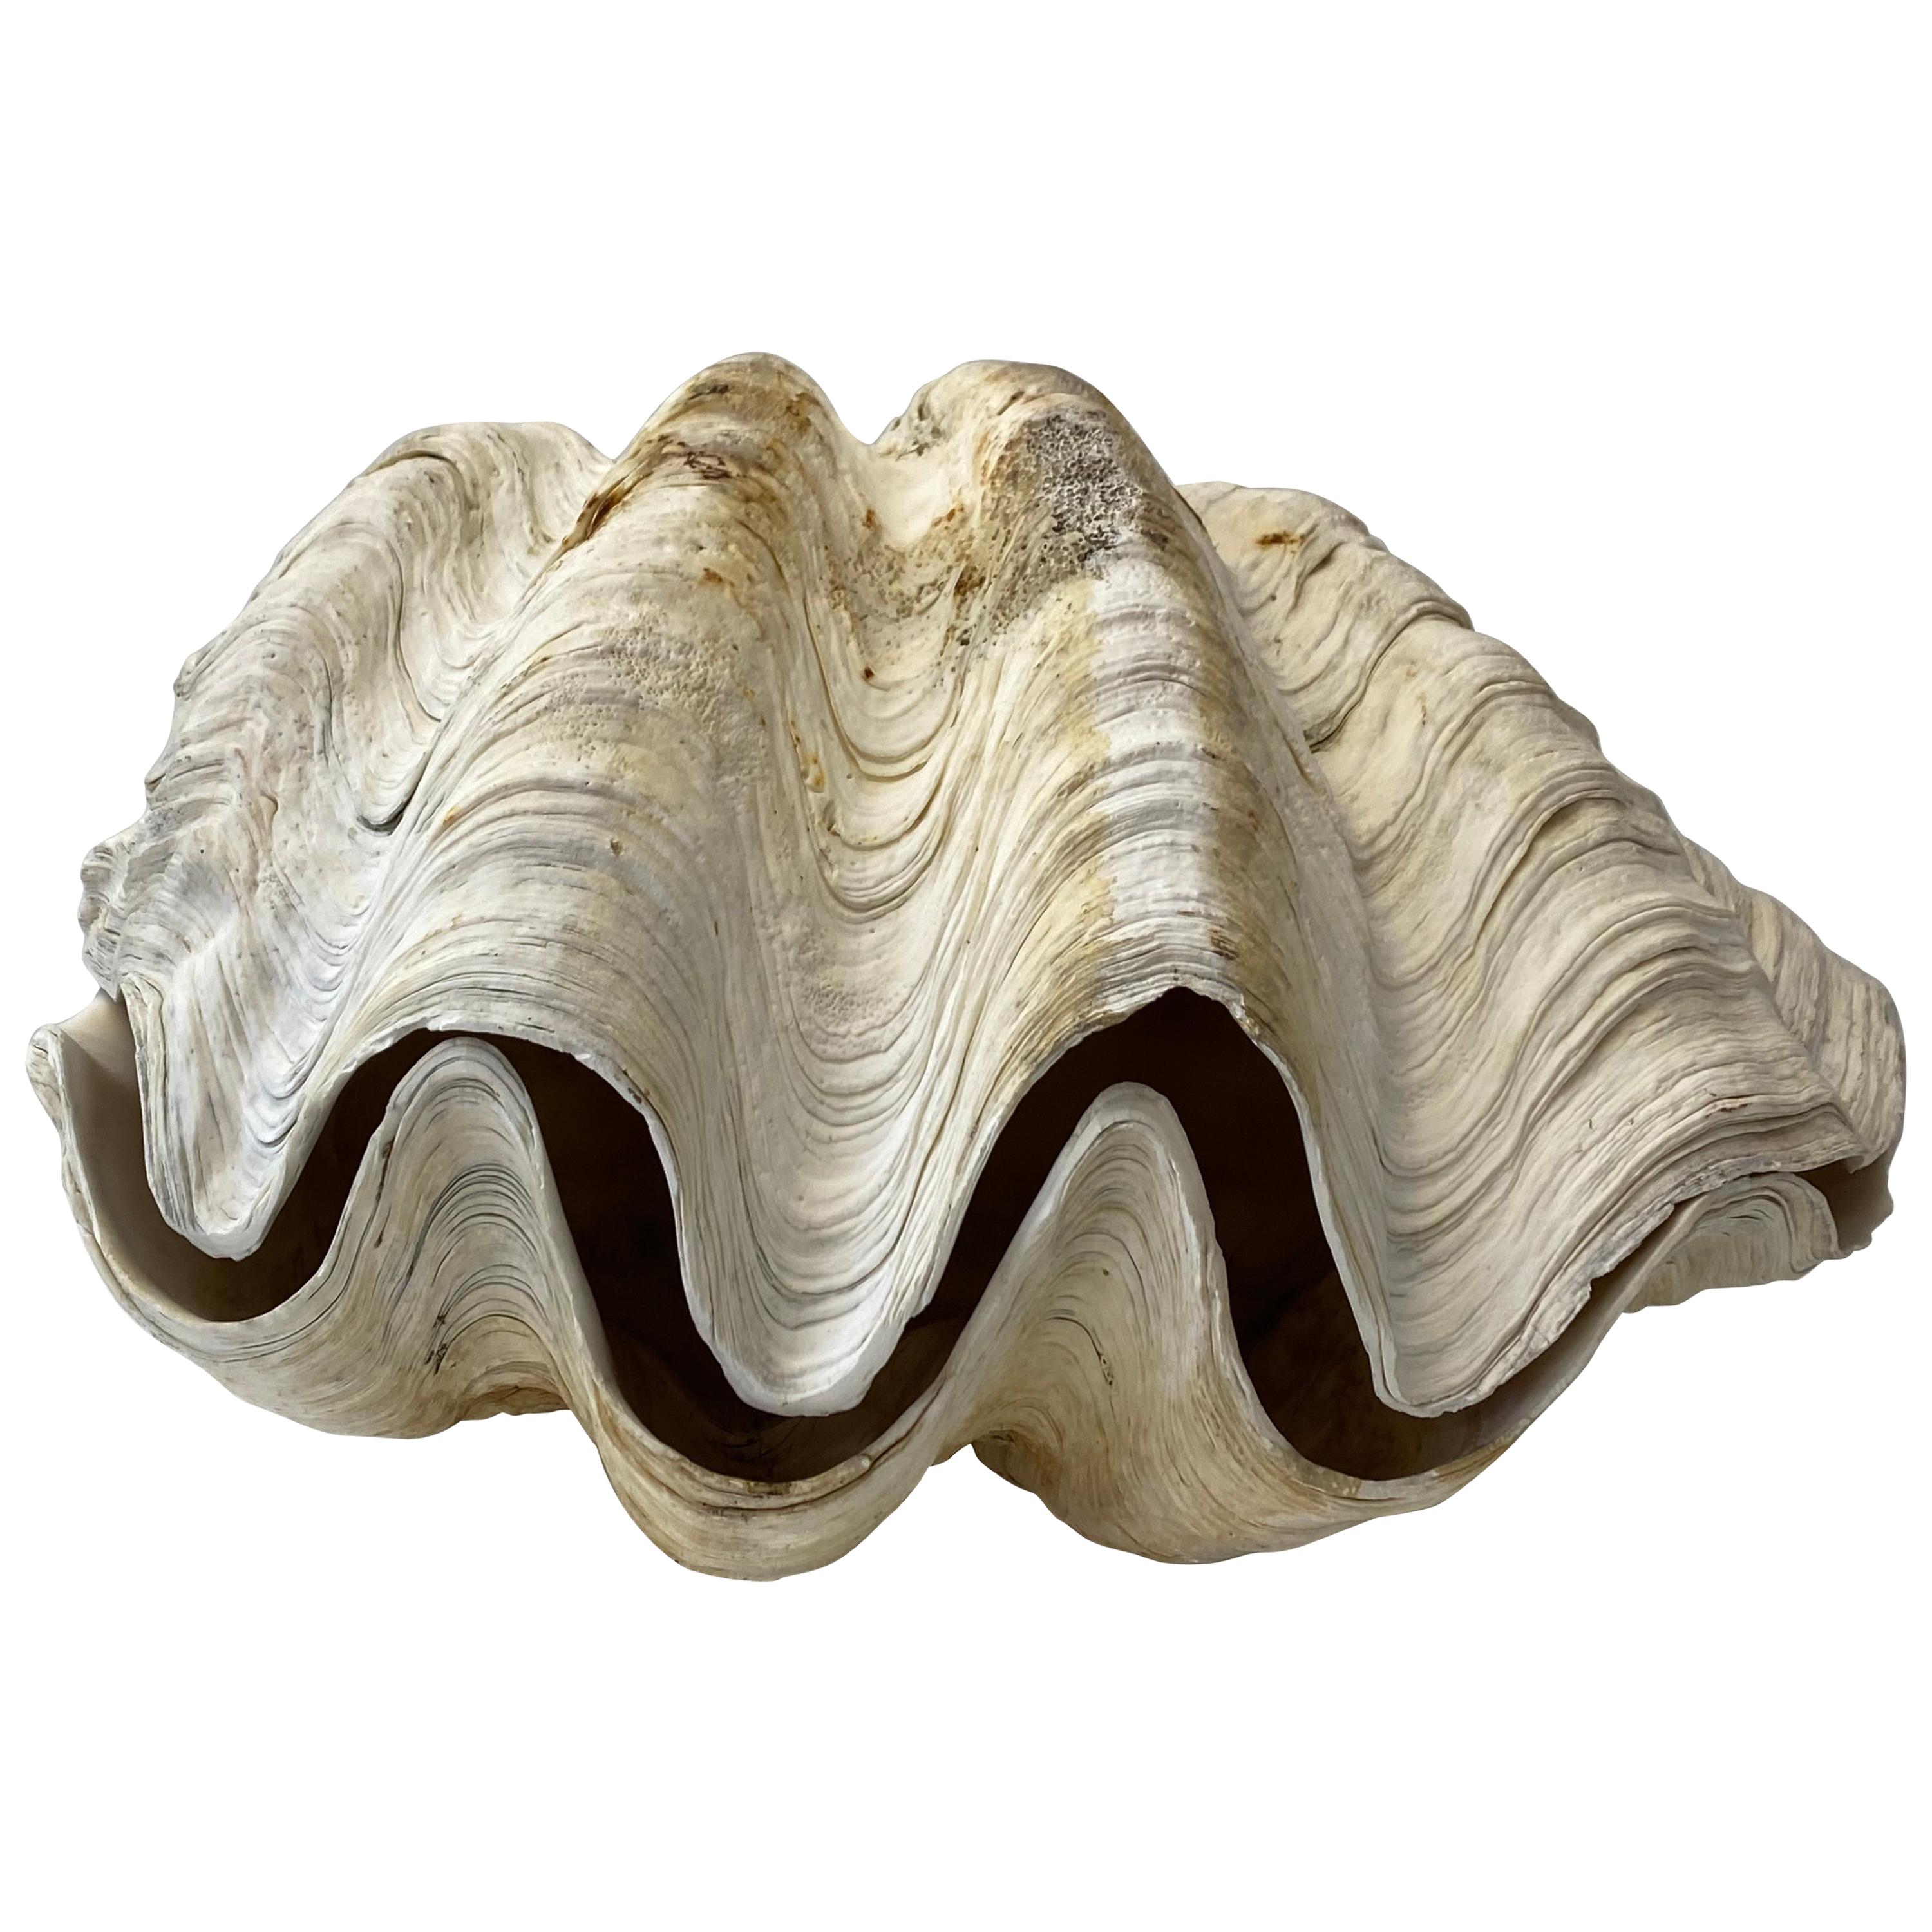 Natural Giant Clam Shell